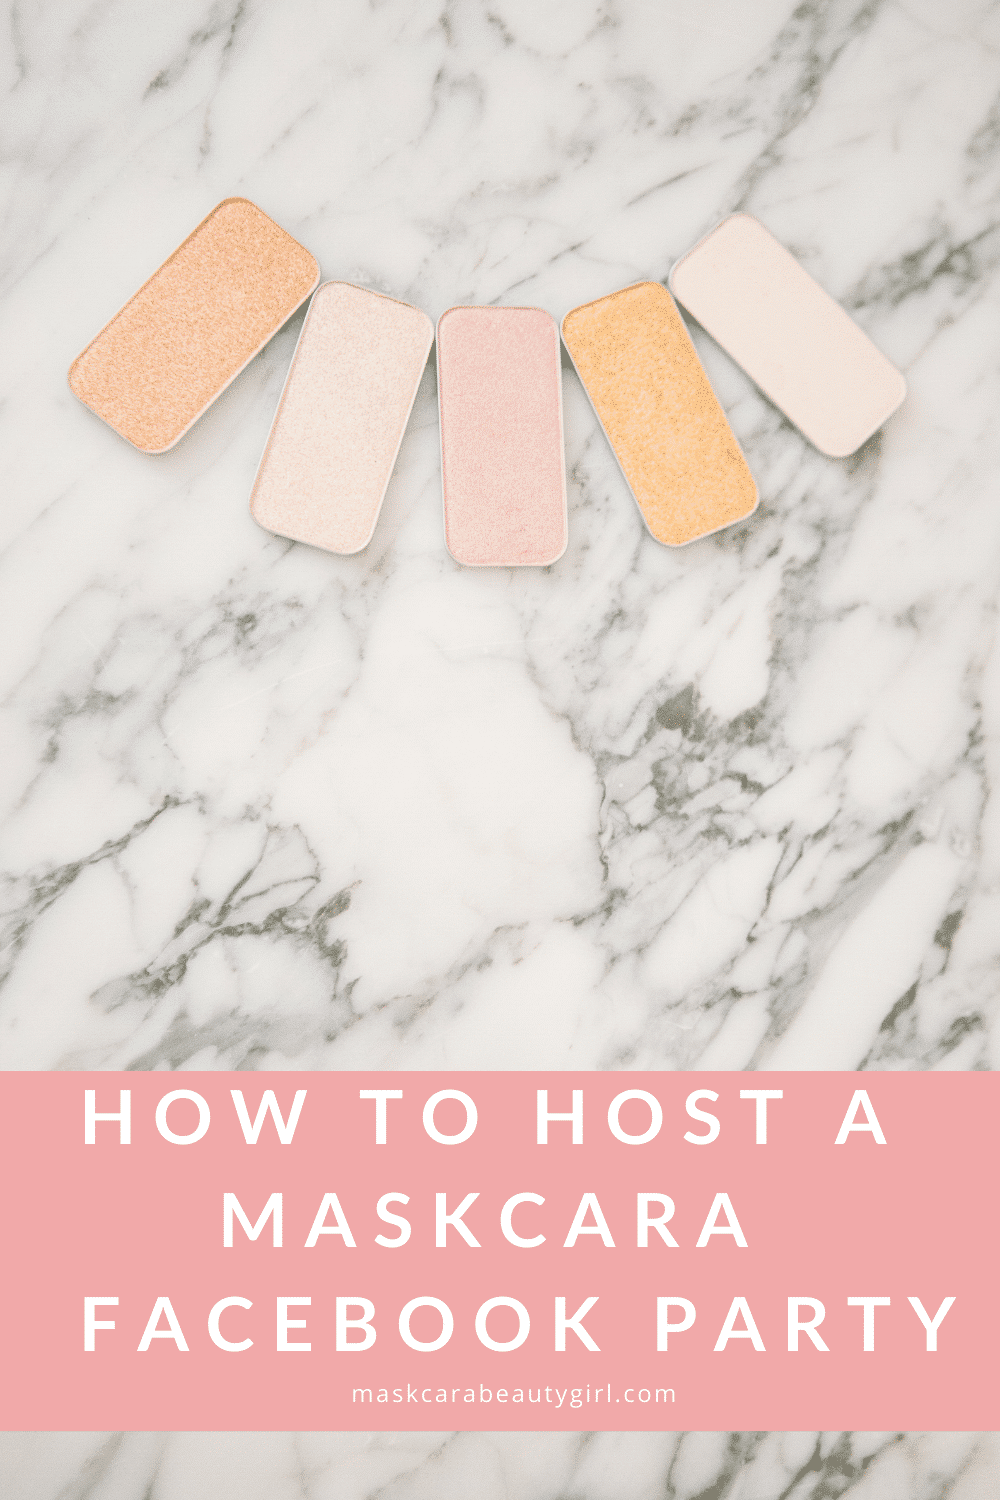 How to Host a Maskcara Facebook Party